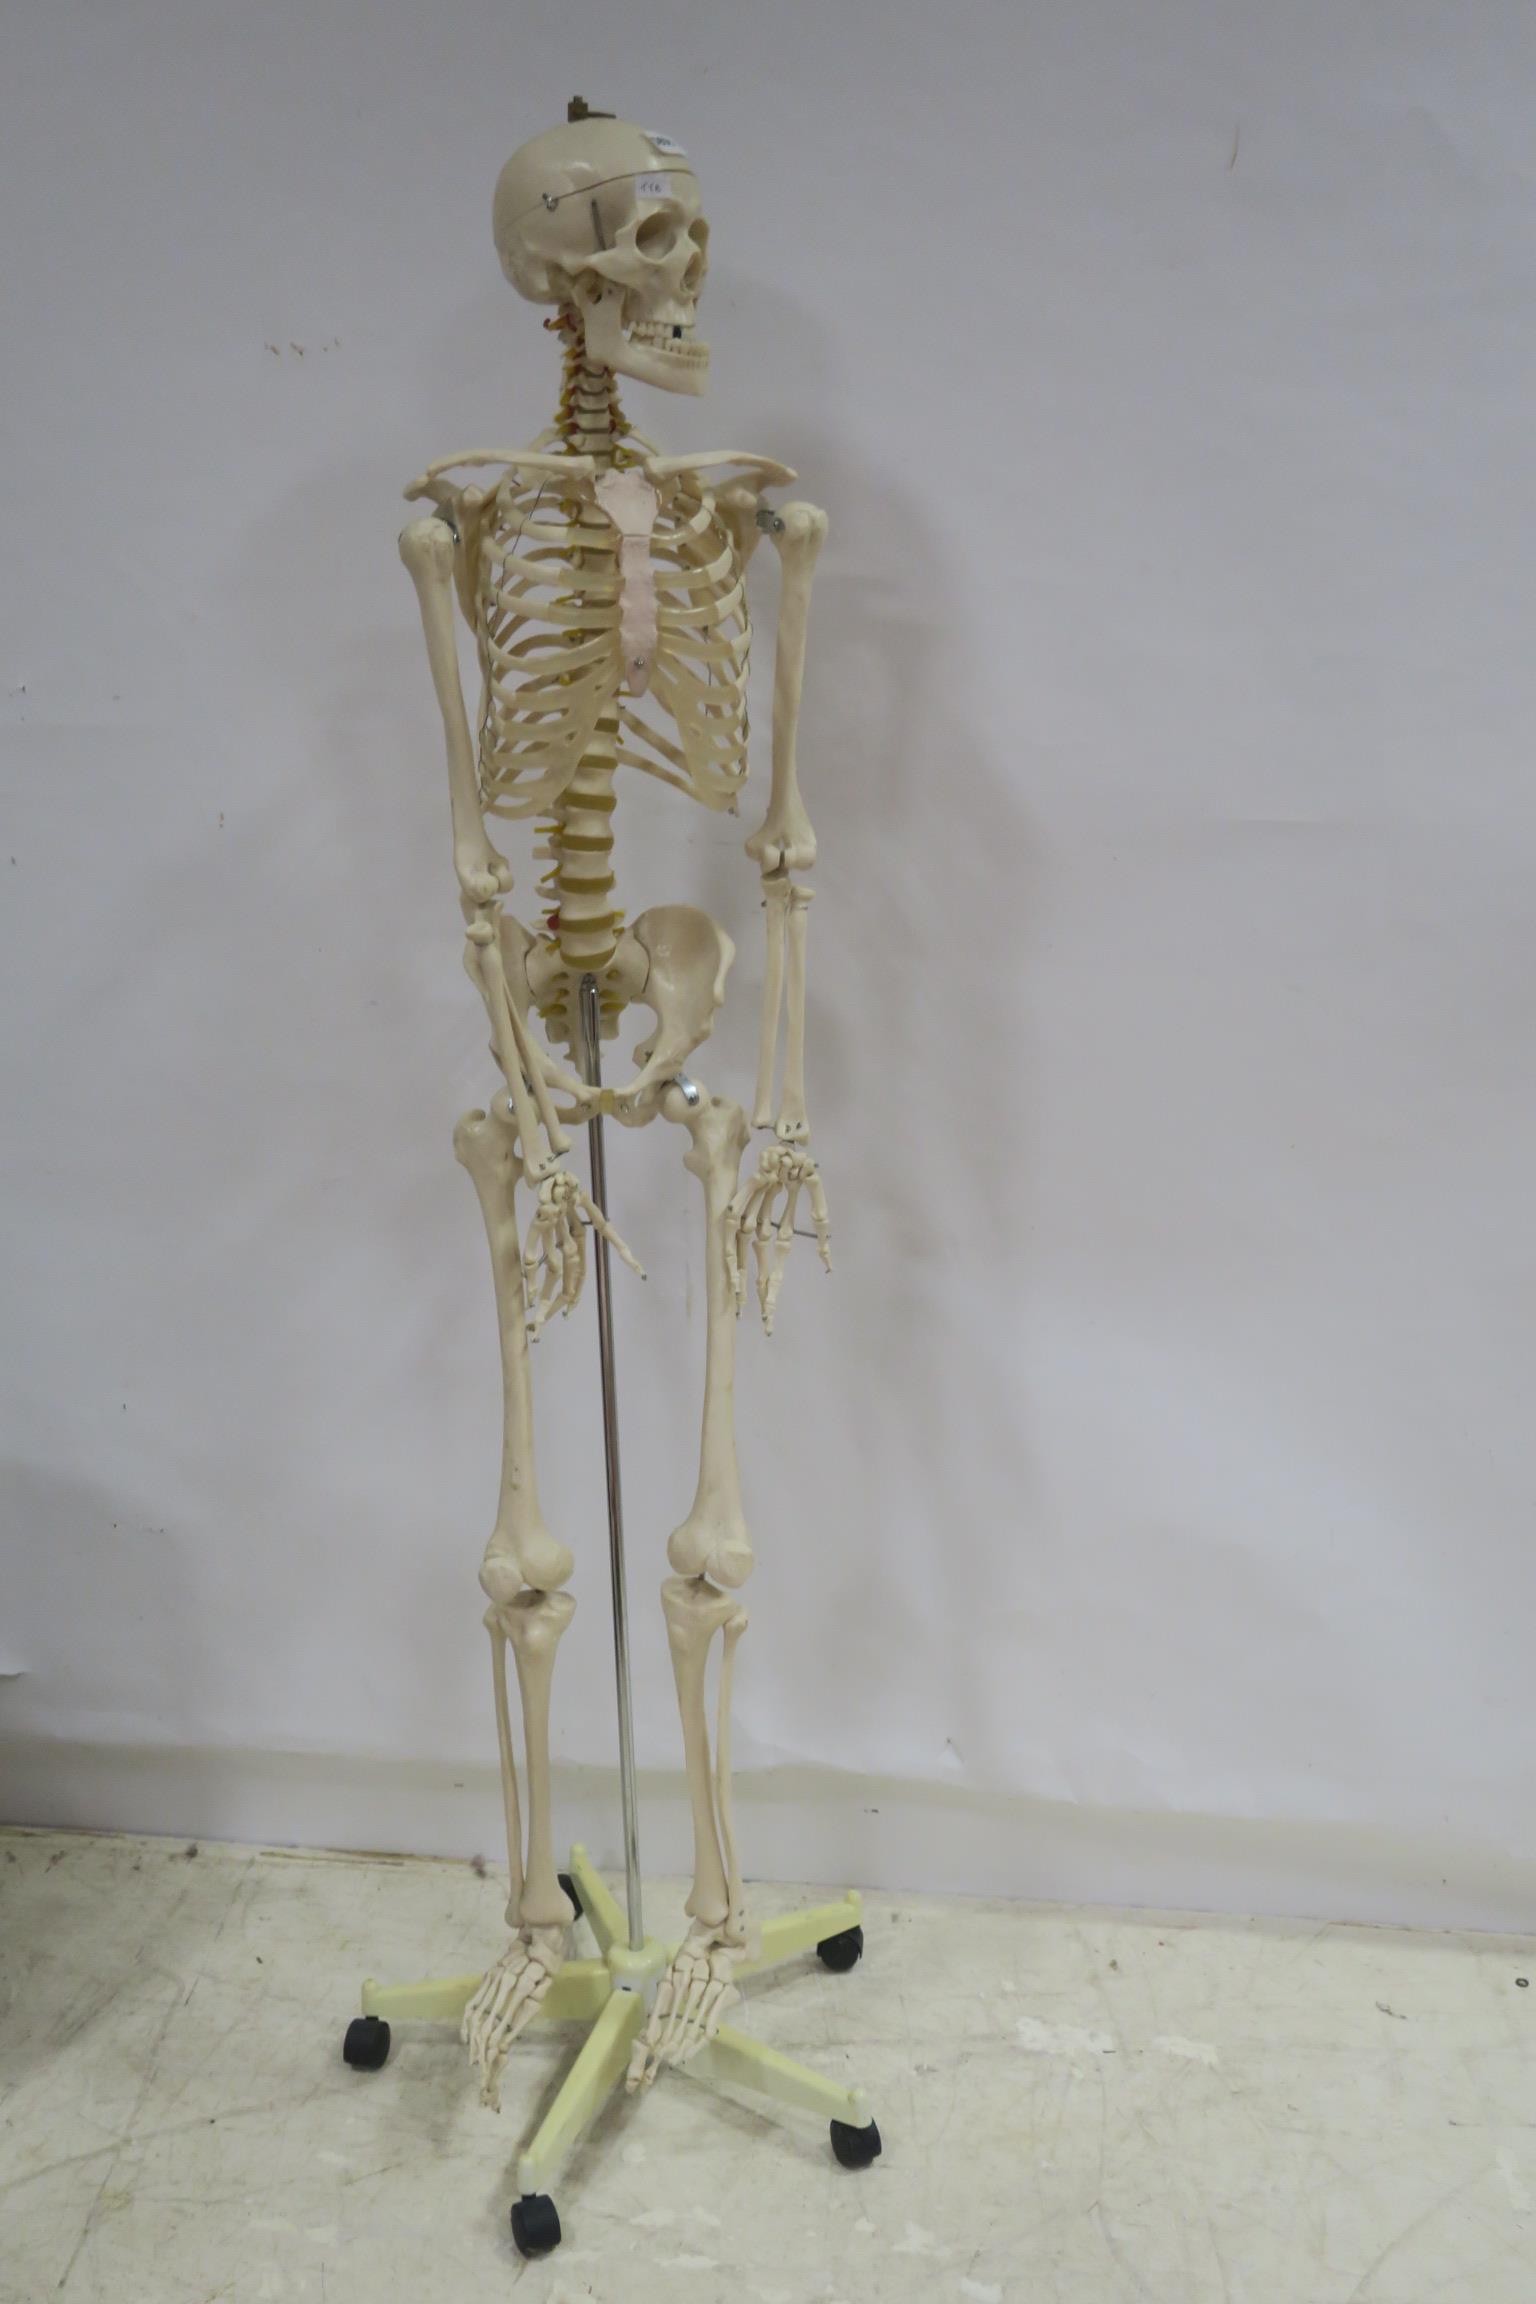 A COMPOSITION MODEL OF A SKELETON raised on a metal stand with castors 184cm